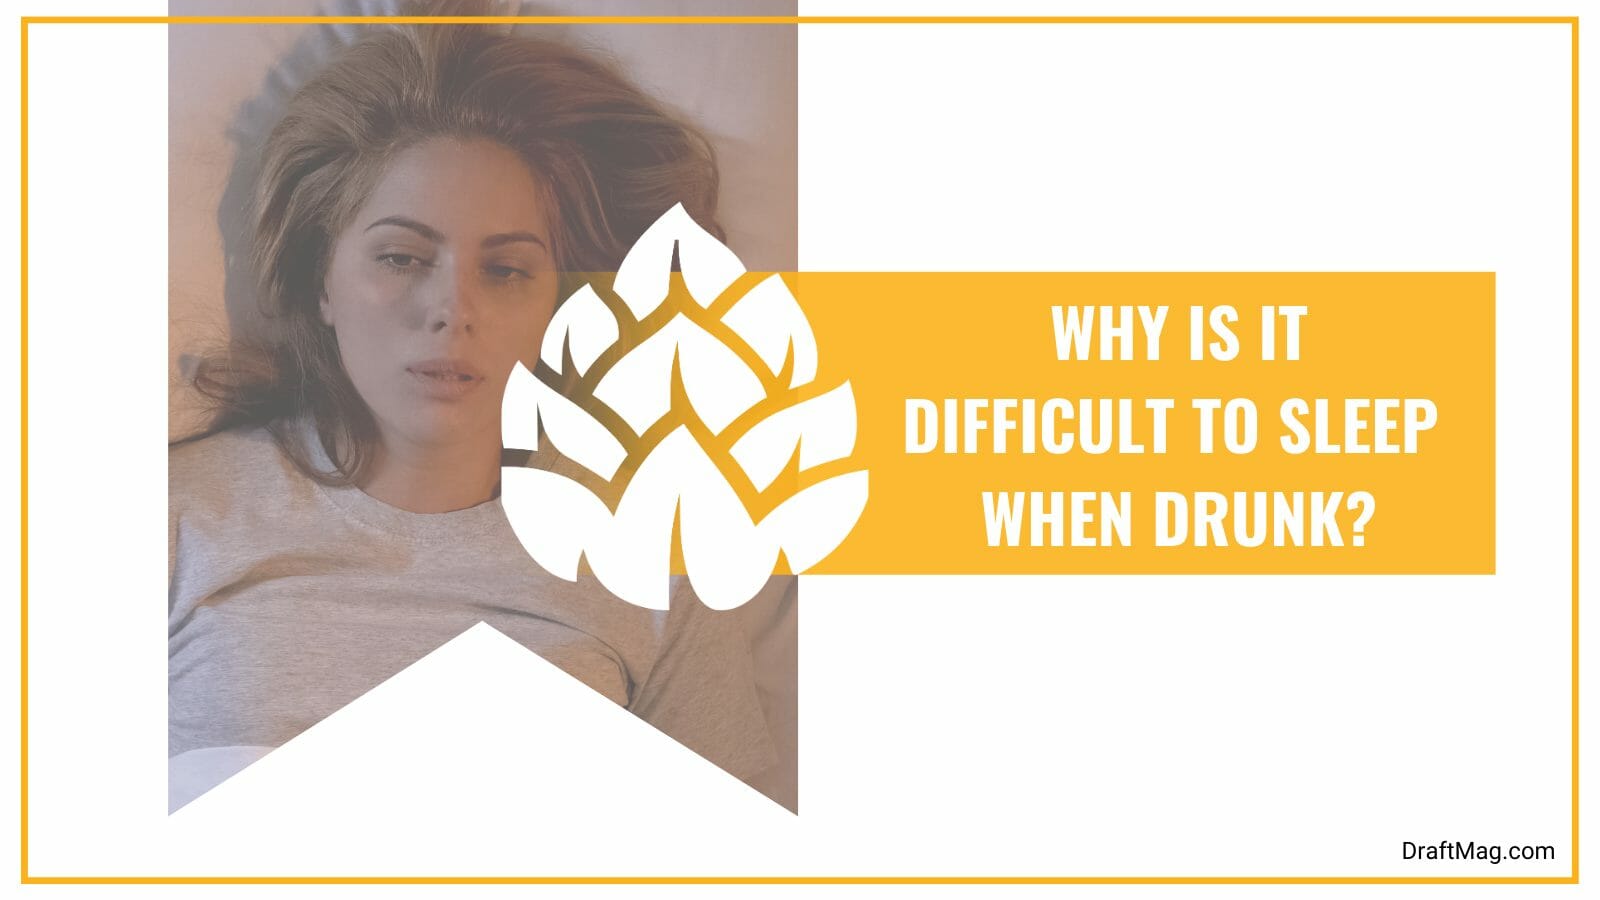 Difficulties to sleep when drunk